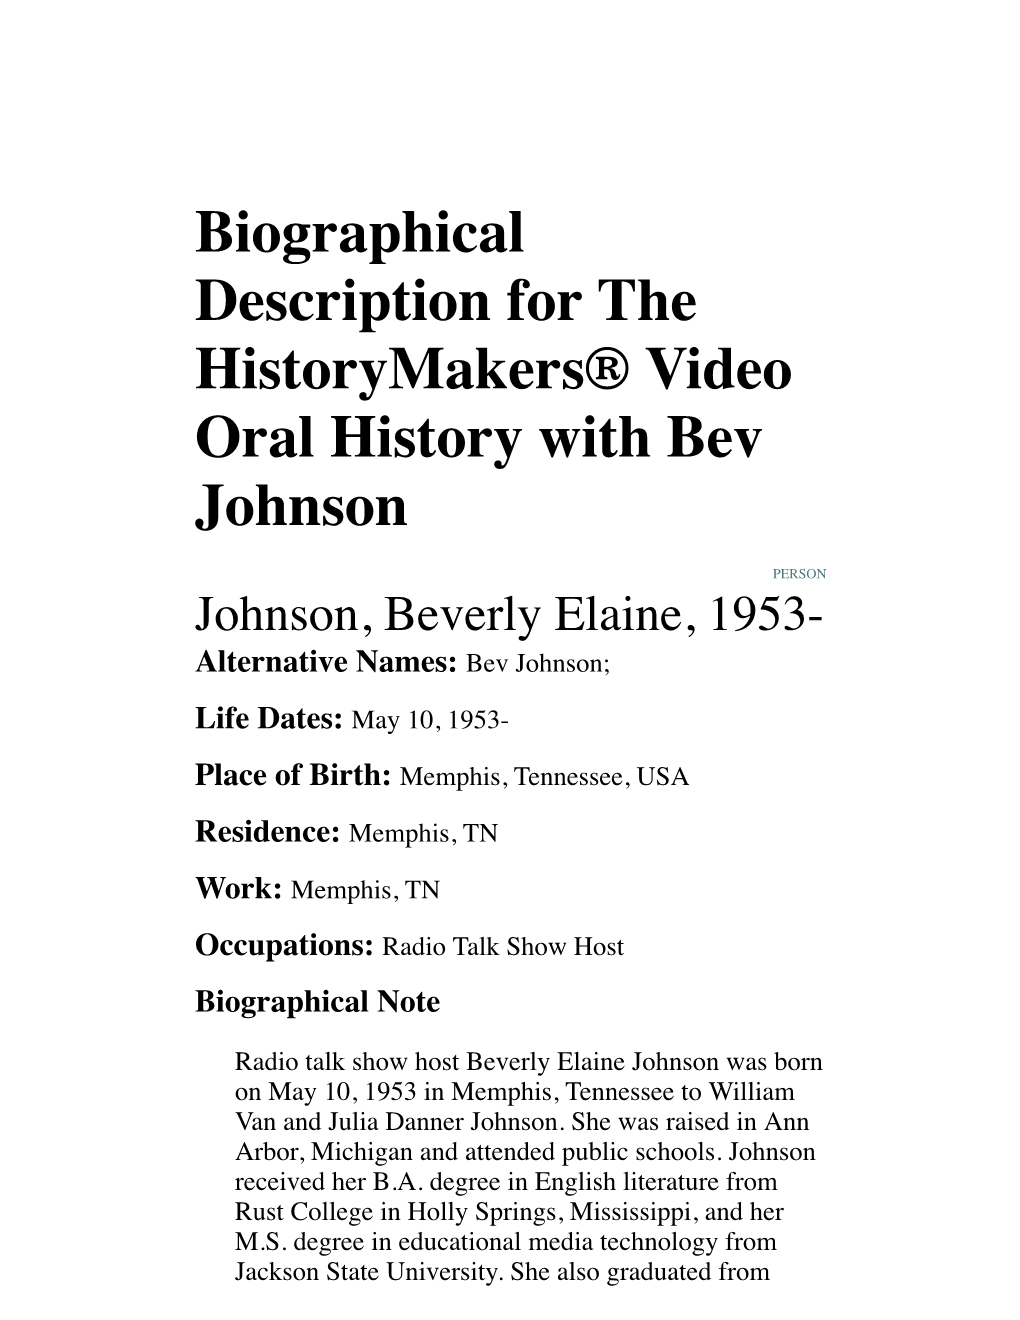 Biographical Description for the Historymakers® Video Oral History with Bev Johnson